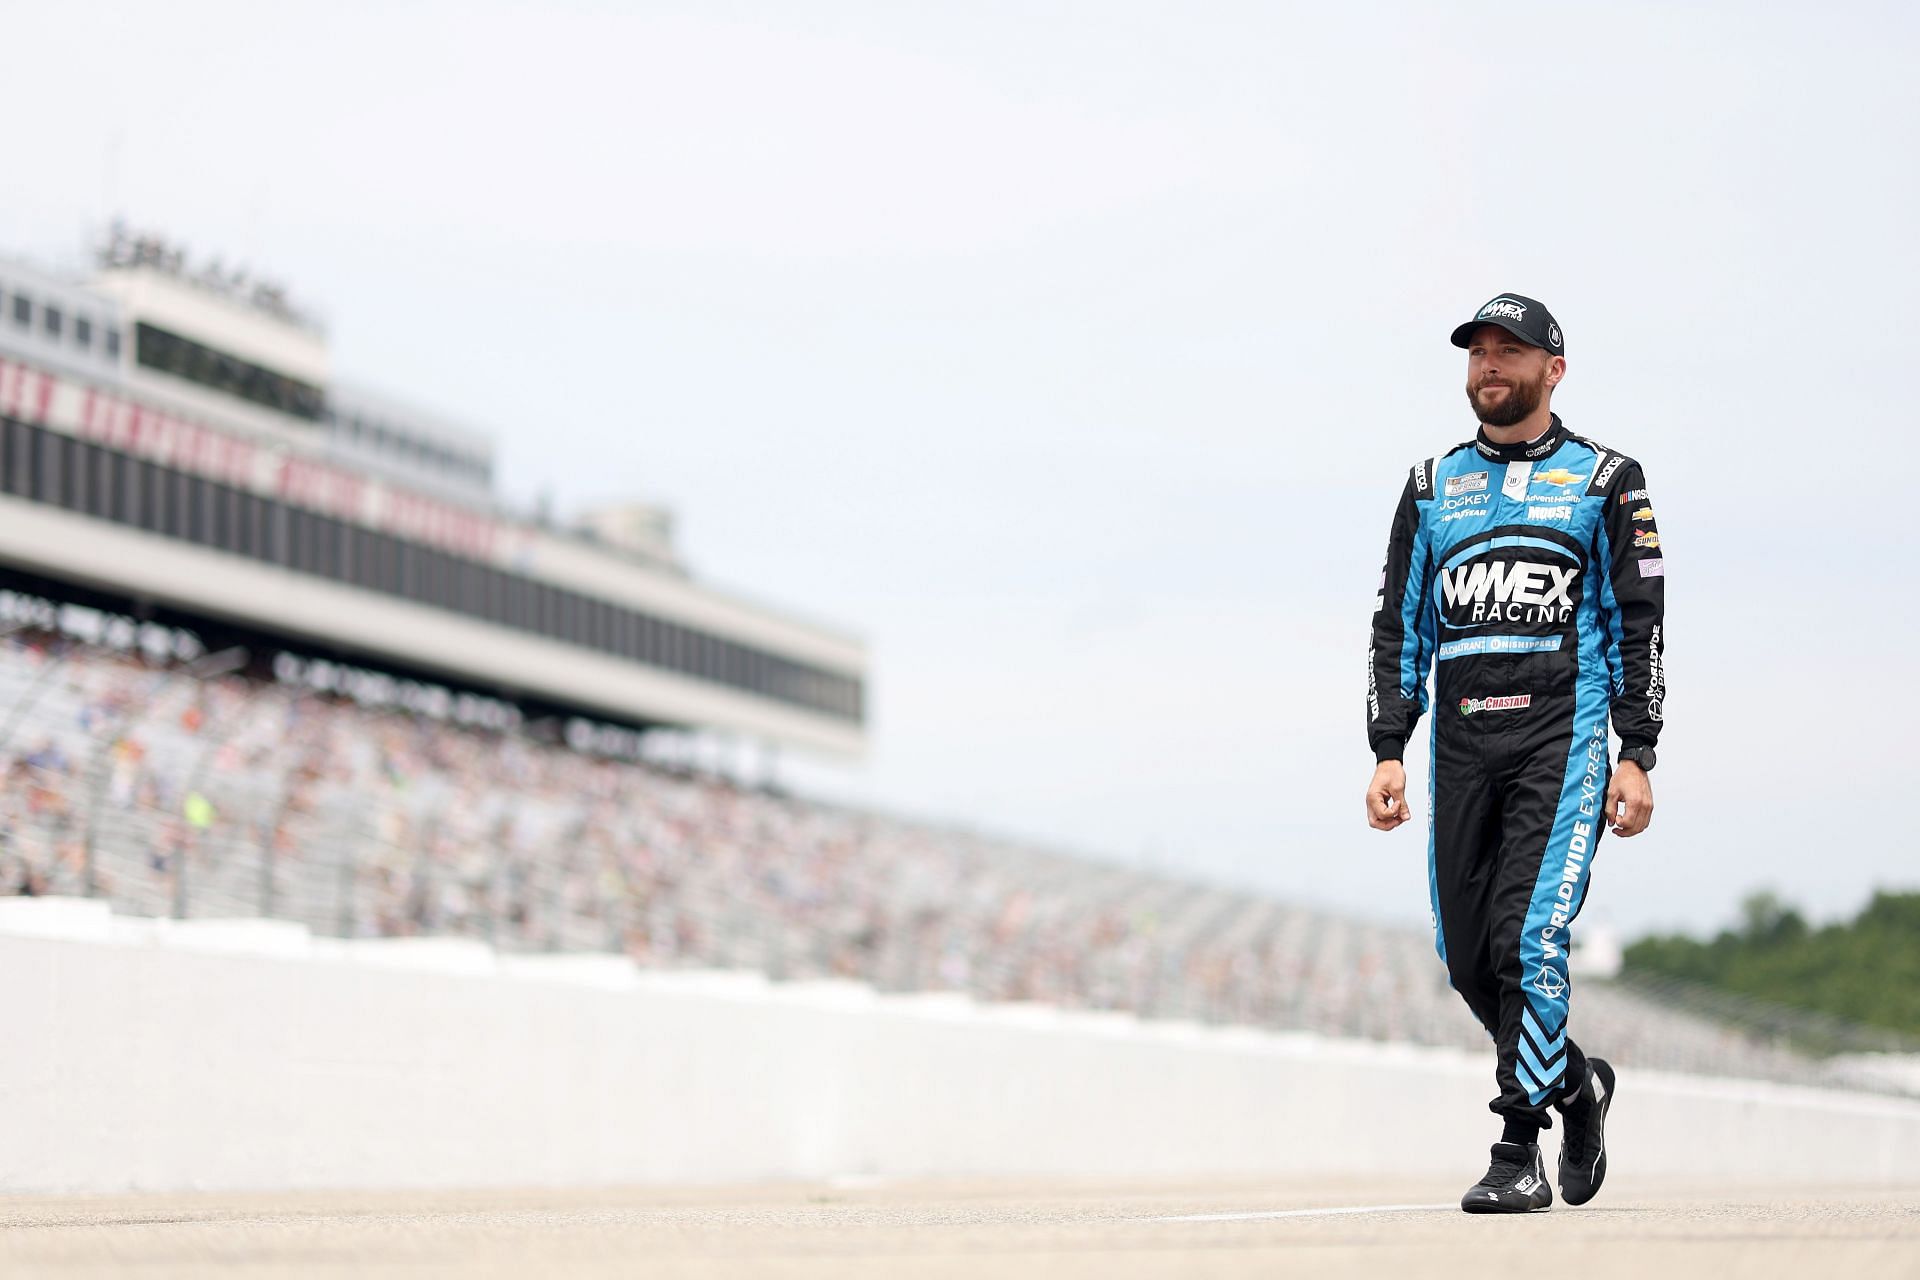 Ross Chastain walks the grid during qualifying for the NASCAR Cup Series Ambetter 301 at New Hampshire Motor Speedway (Photo by James Gilbert/Getty Images)